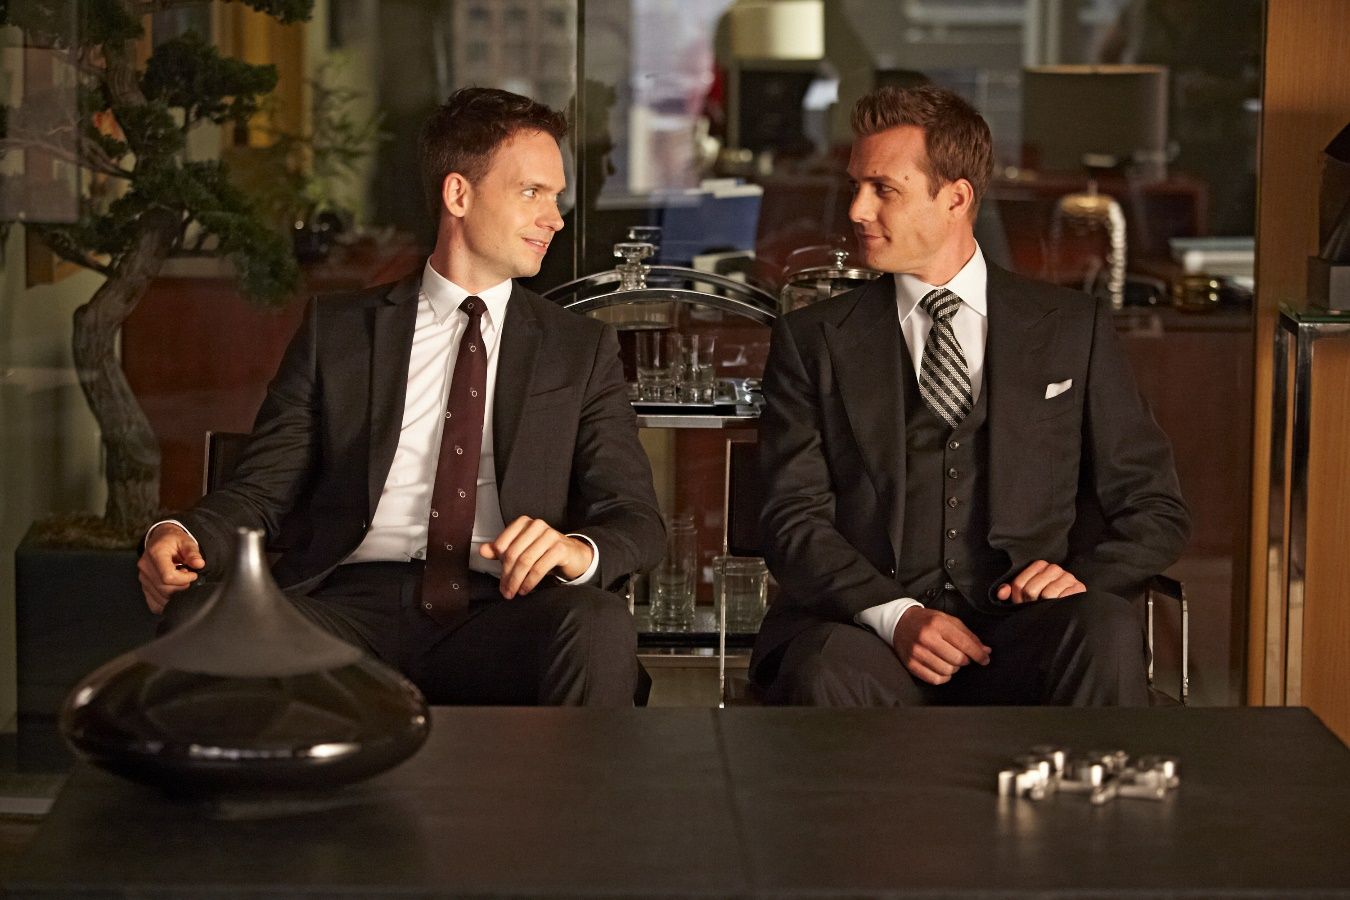 Suits LA Cast: Will Harvey Specter, Mike Ross & Others Return?